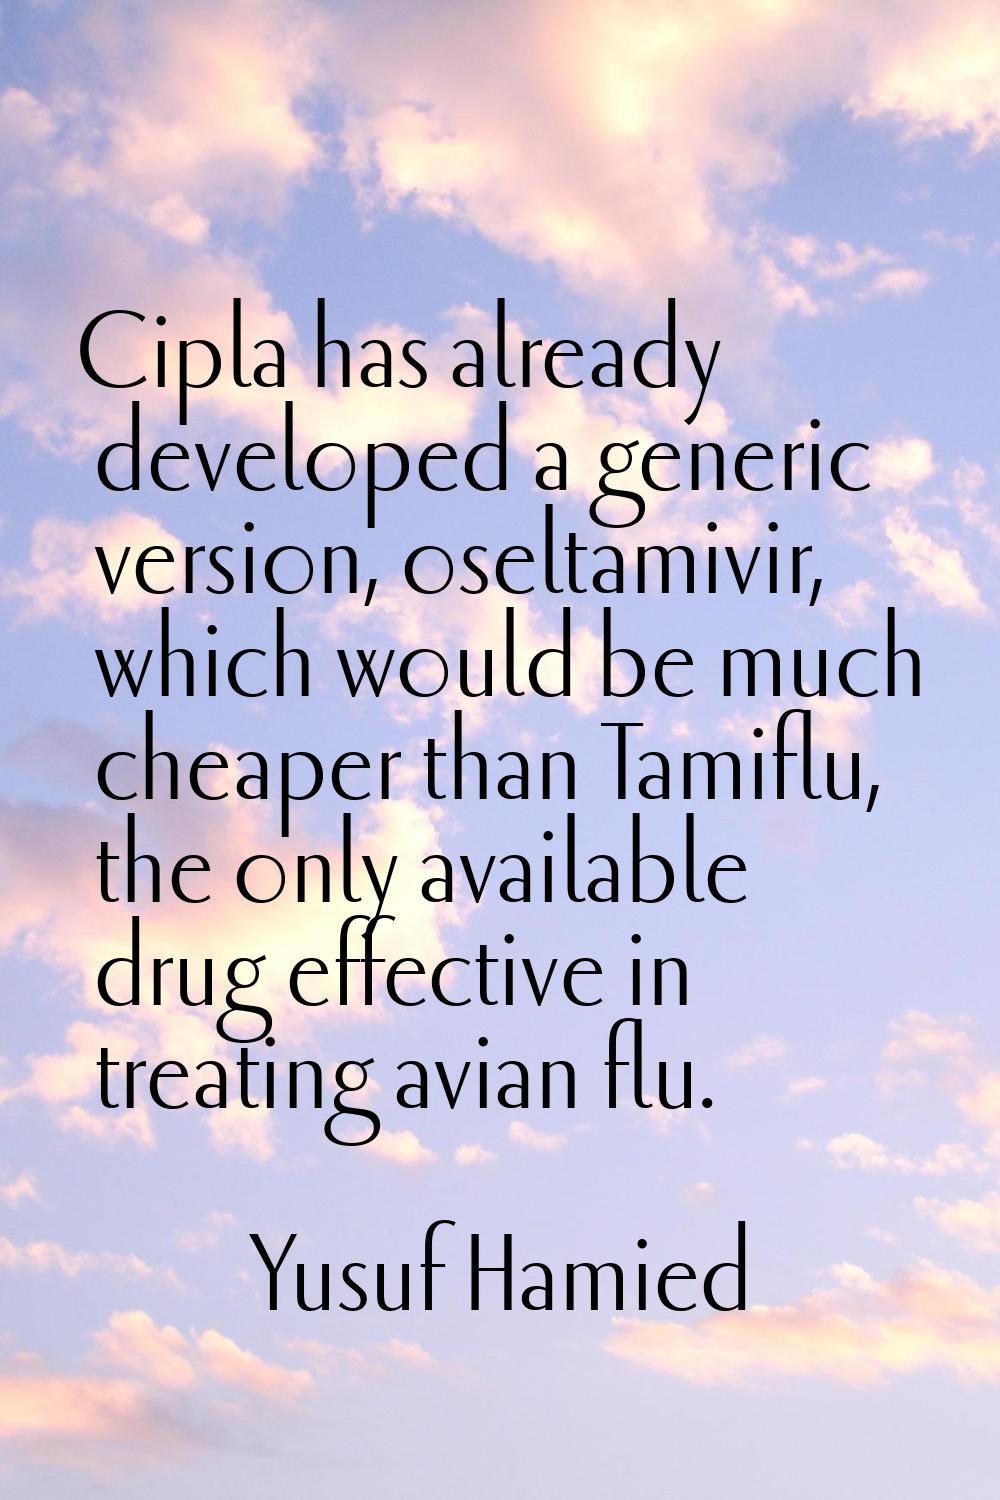 Cipla has already developed a generic version, oseltamivir, which would be much cheaper than Tamifl